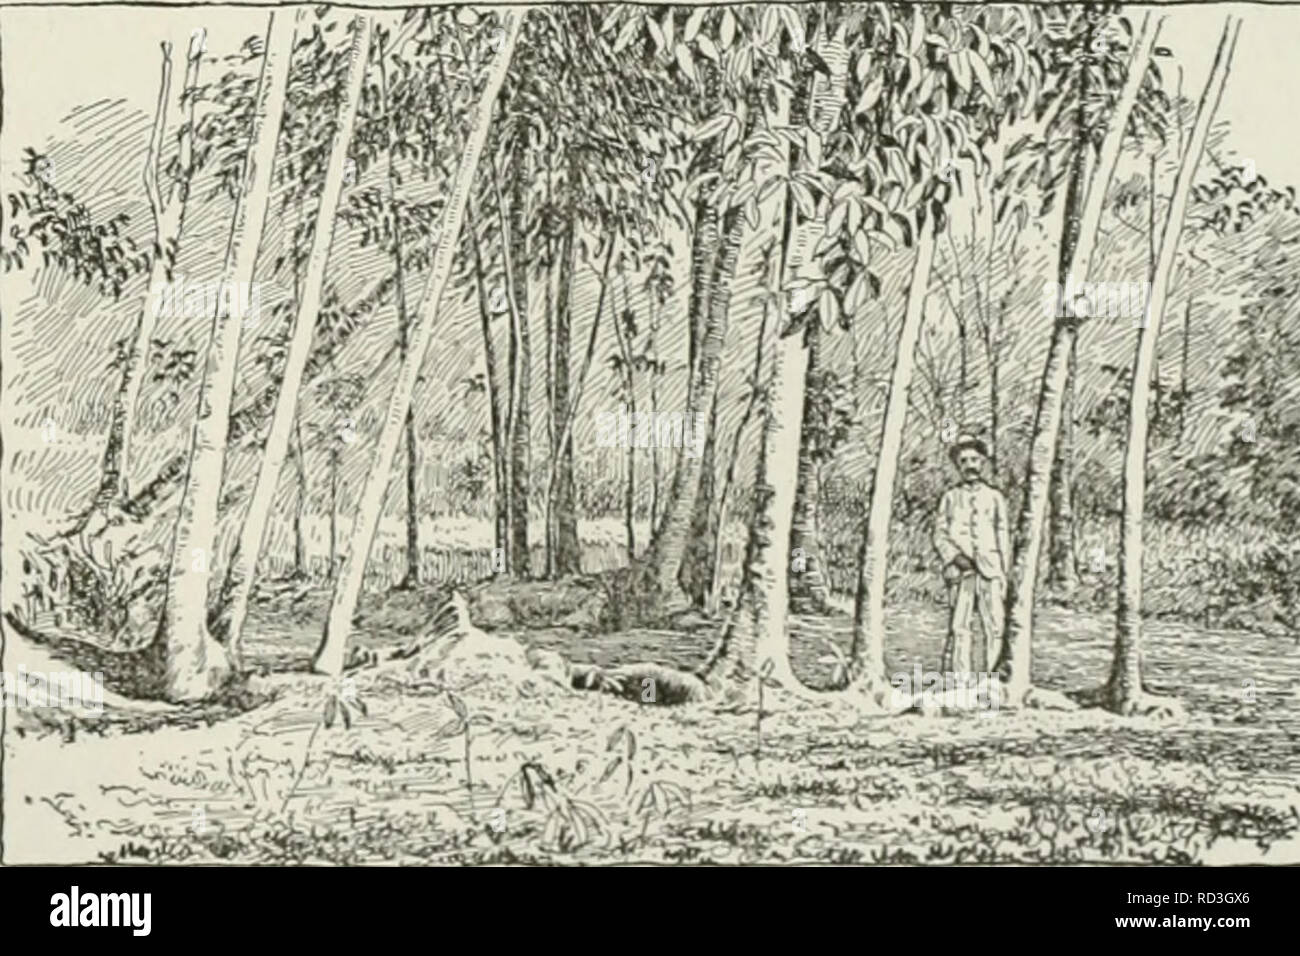 . Cyclopedia of farm crops : a popular survey of crops and crop-making methods in the United States and Canada. Agriculture -- Canada; Agriculture -- United States; Farm produce -- Canada; Farm produce -- United States. Fig. 797. Tapping rubber trees. where a lower temperature prevails than on the plains. In Trinidad it grows at elevations of 130 to 500 feet above sea level. Funtumia was for- merly known as Kiclvxia. (Hart.) West African rubber {Landolphia species). There are several species of this genus which yield rubber of good quality, but which do not respond readily to cultural treatmen Stock Photo